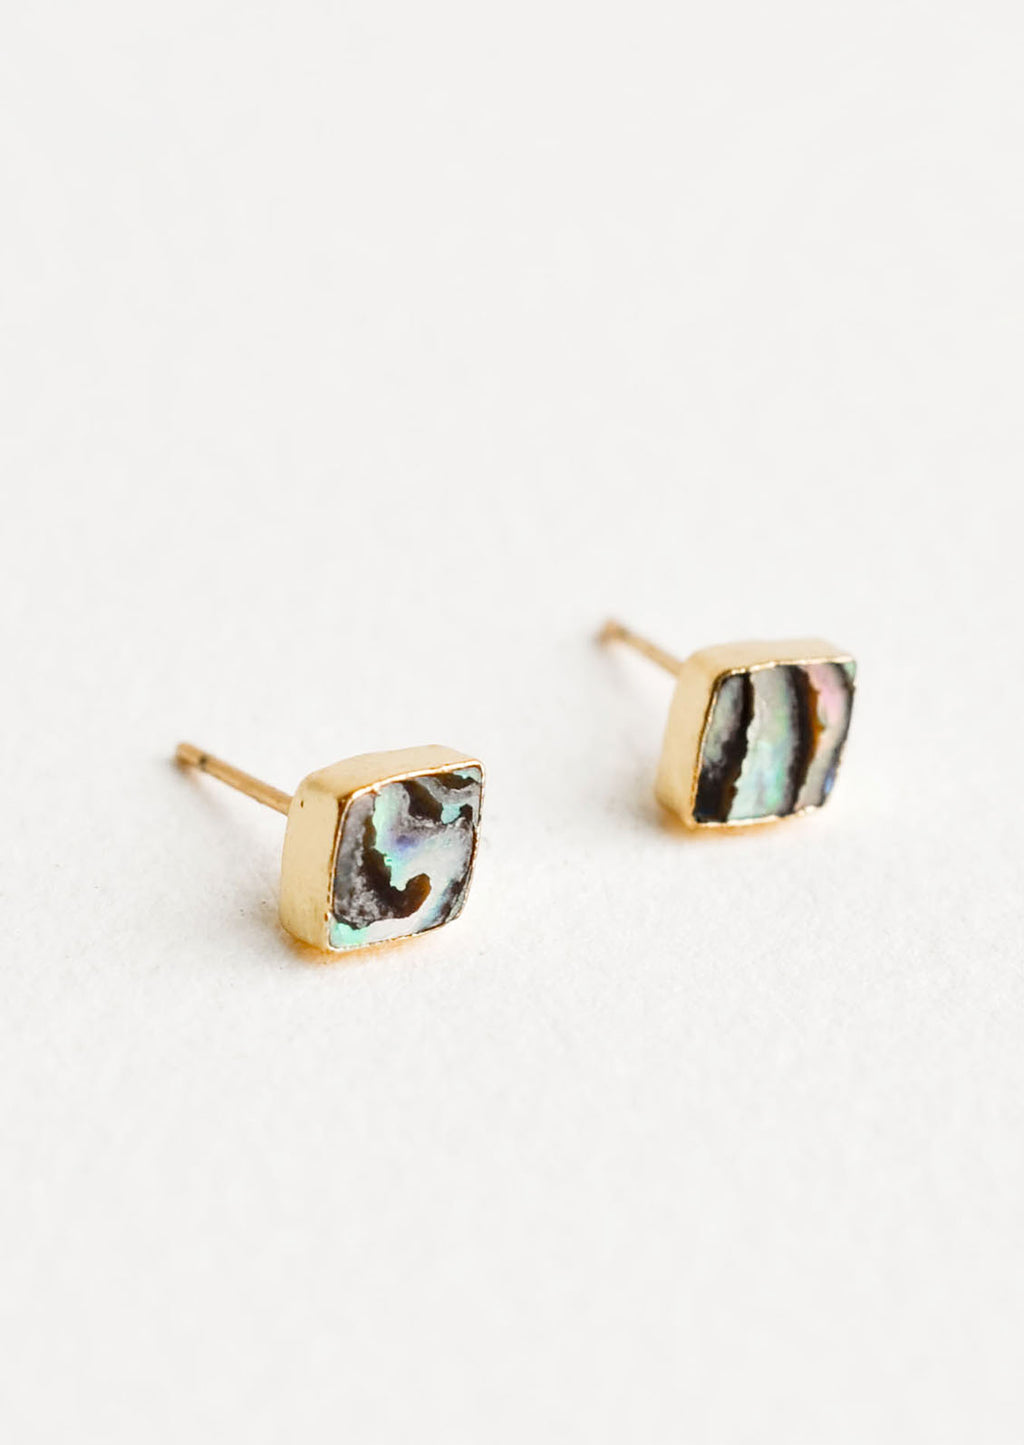 1: Diamond shape stud earrings with flush set stone. Abalone shell surrounded by gold trim.